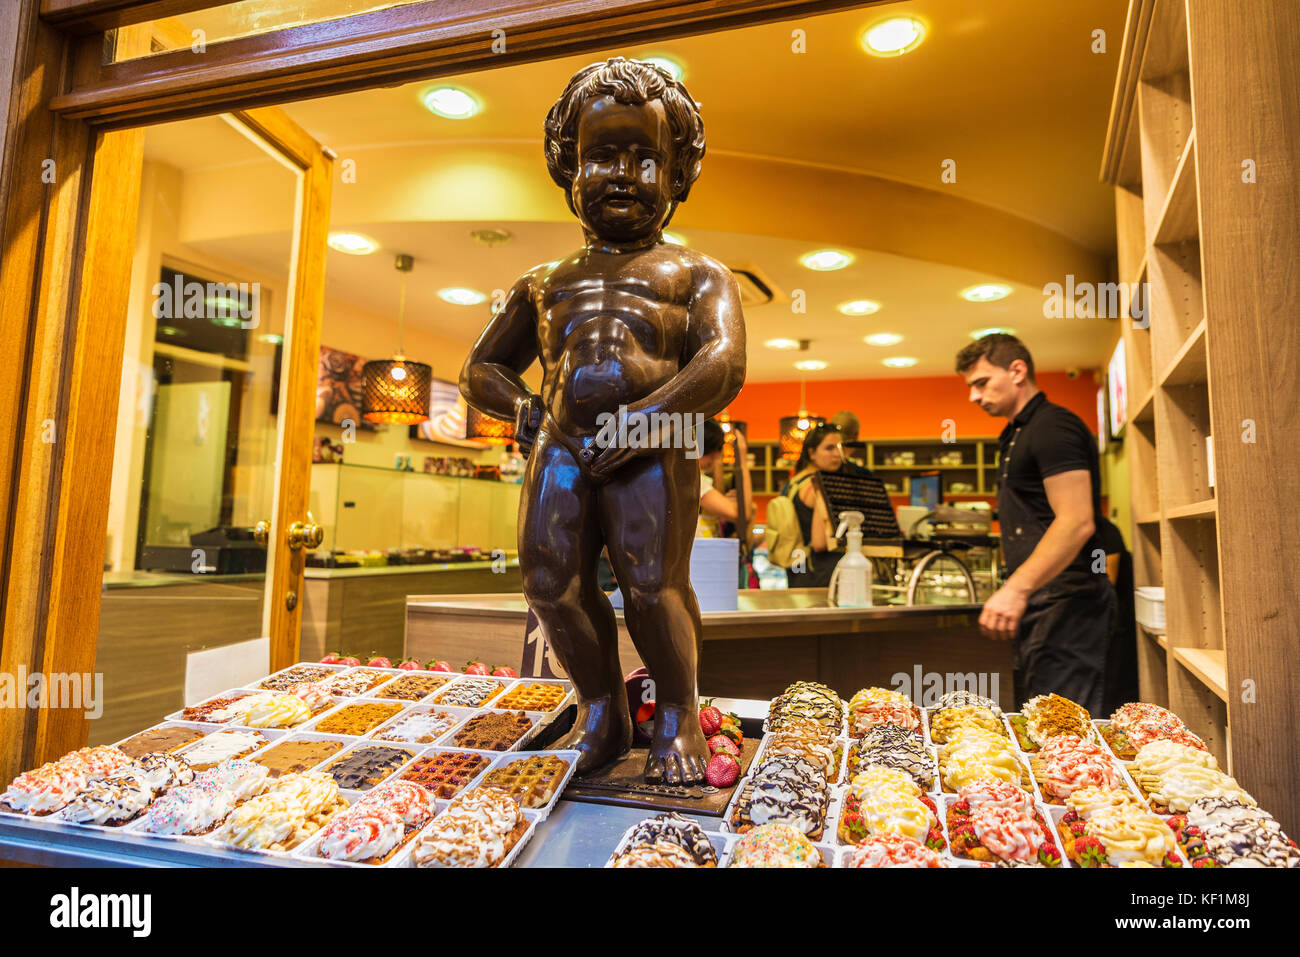 Brussels, Belgium - August 26, 2017: Statue of chocolate of Manneken pis as a candy store decoration with people located in the historical center of B Stock Photo